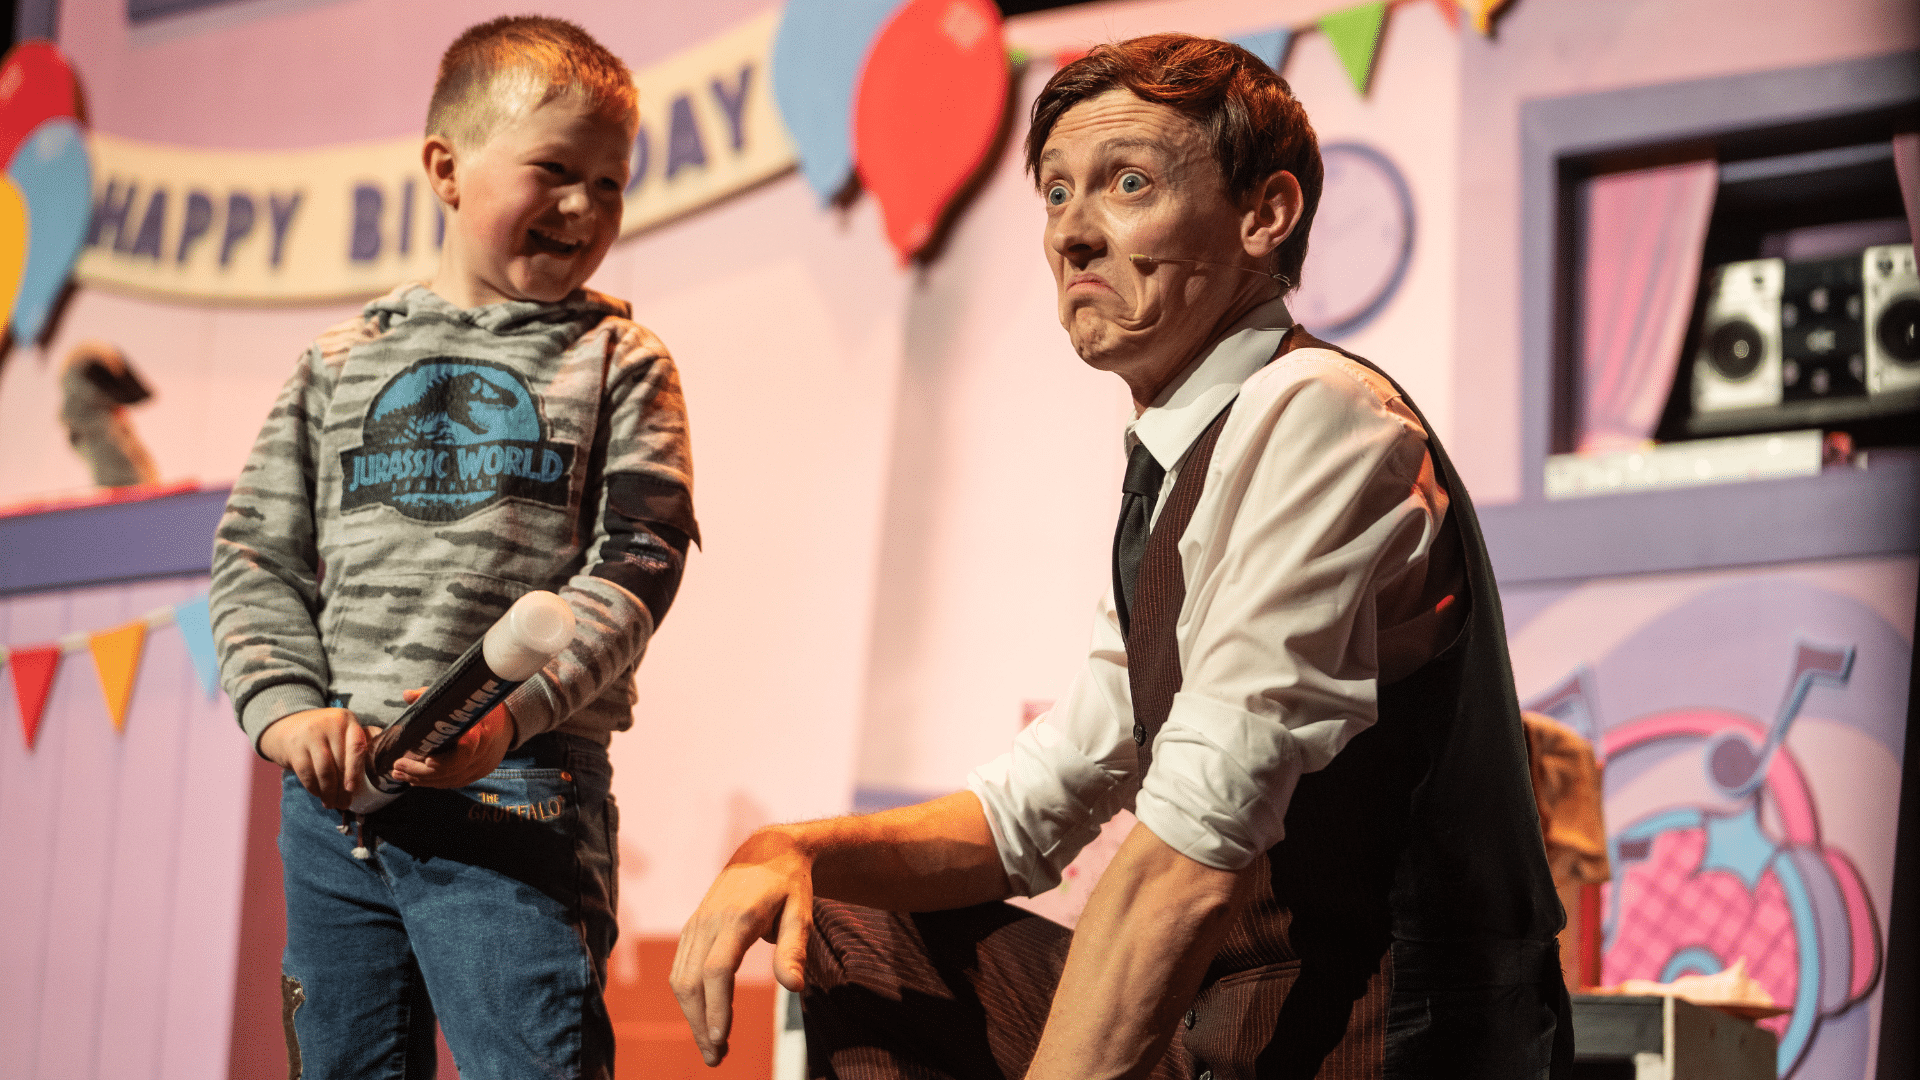 The Sooty Show production image: a man in a brown pinstriped suit kneels next to a young boy, who is smiling.